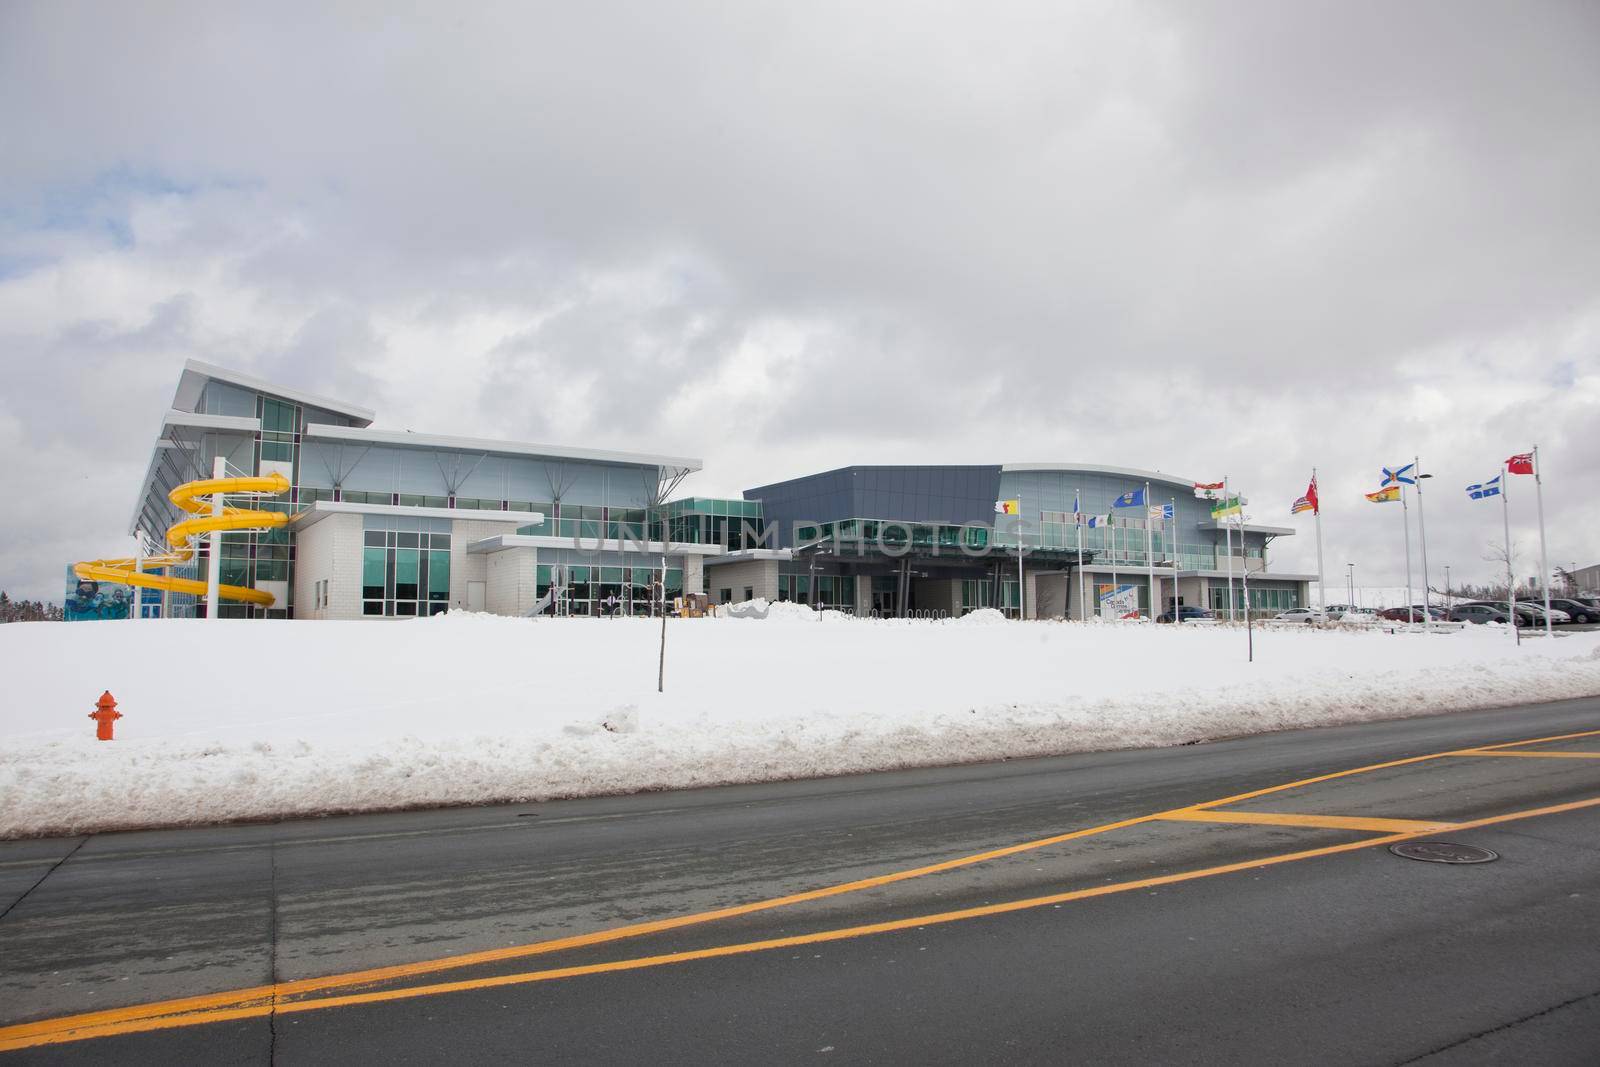  March 10, 2018: Halifax, Nova Scotia- the exterior of the Canada Games Centre with flags from each province and the famous yellow waterslide